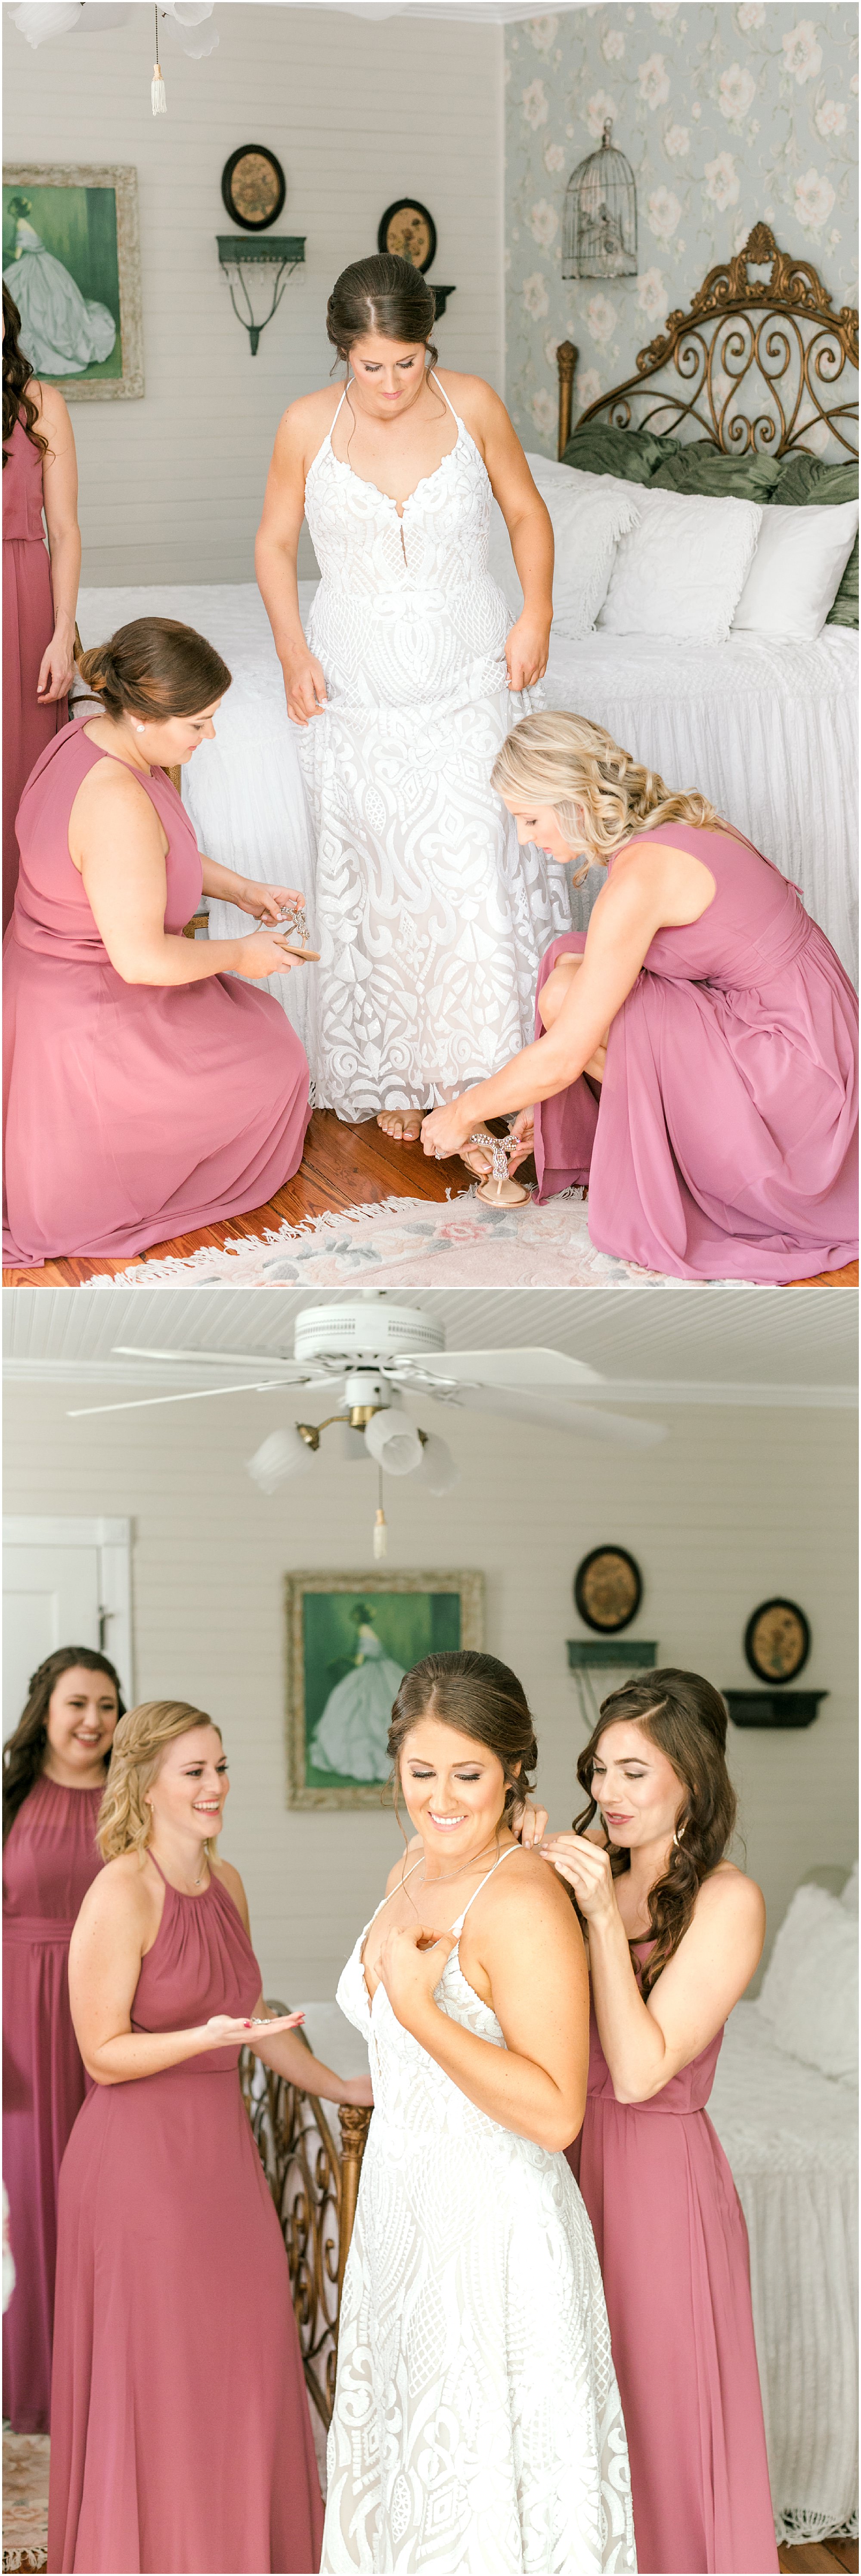 Bridesmaids in dusty rose colored dresses helping the bride into her dress and putting on her shoes. 